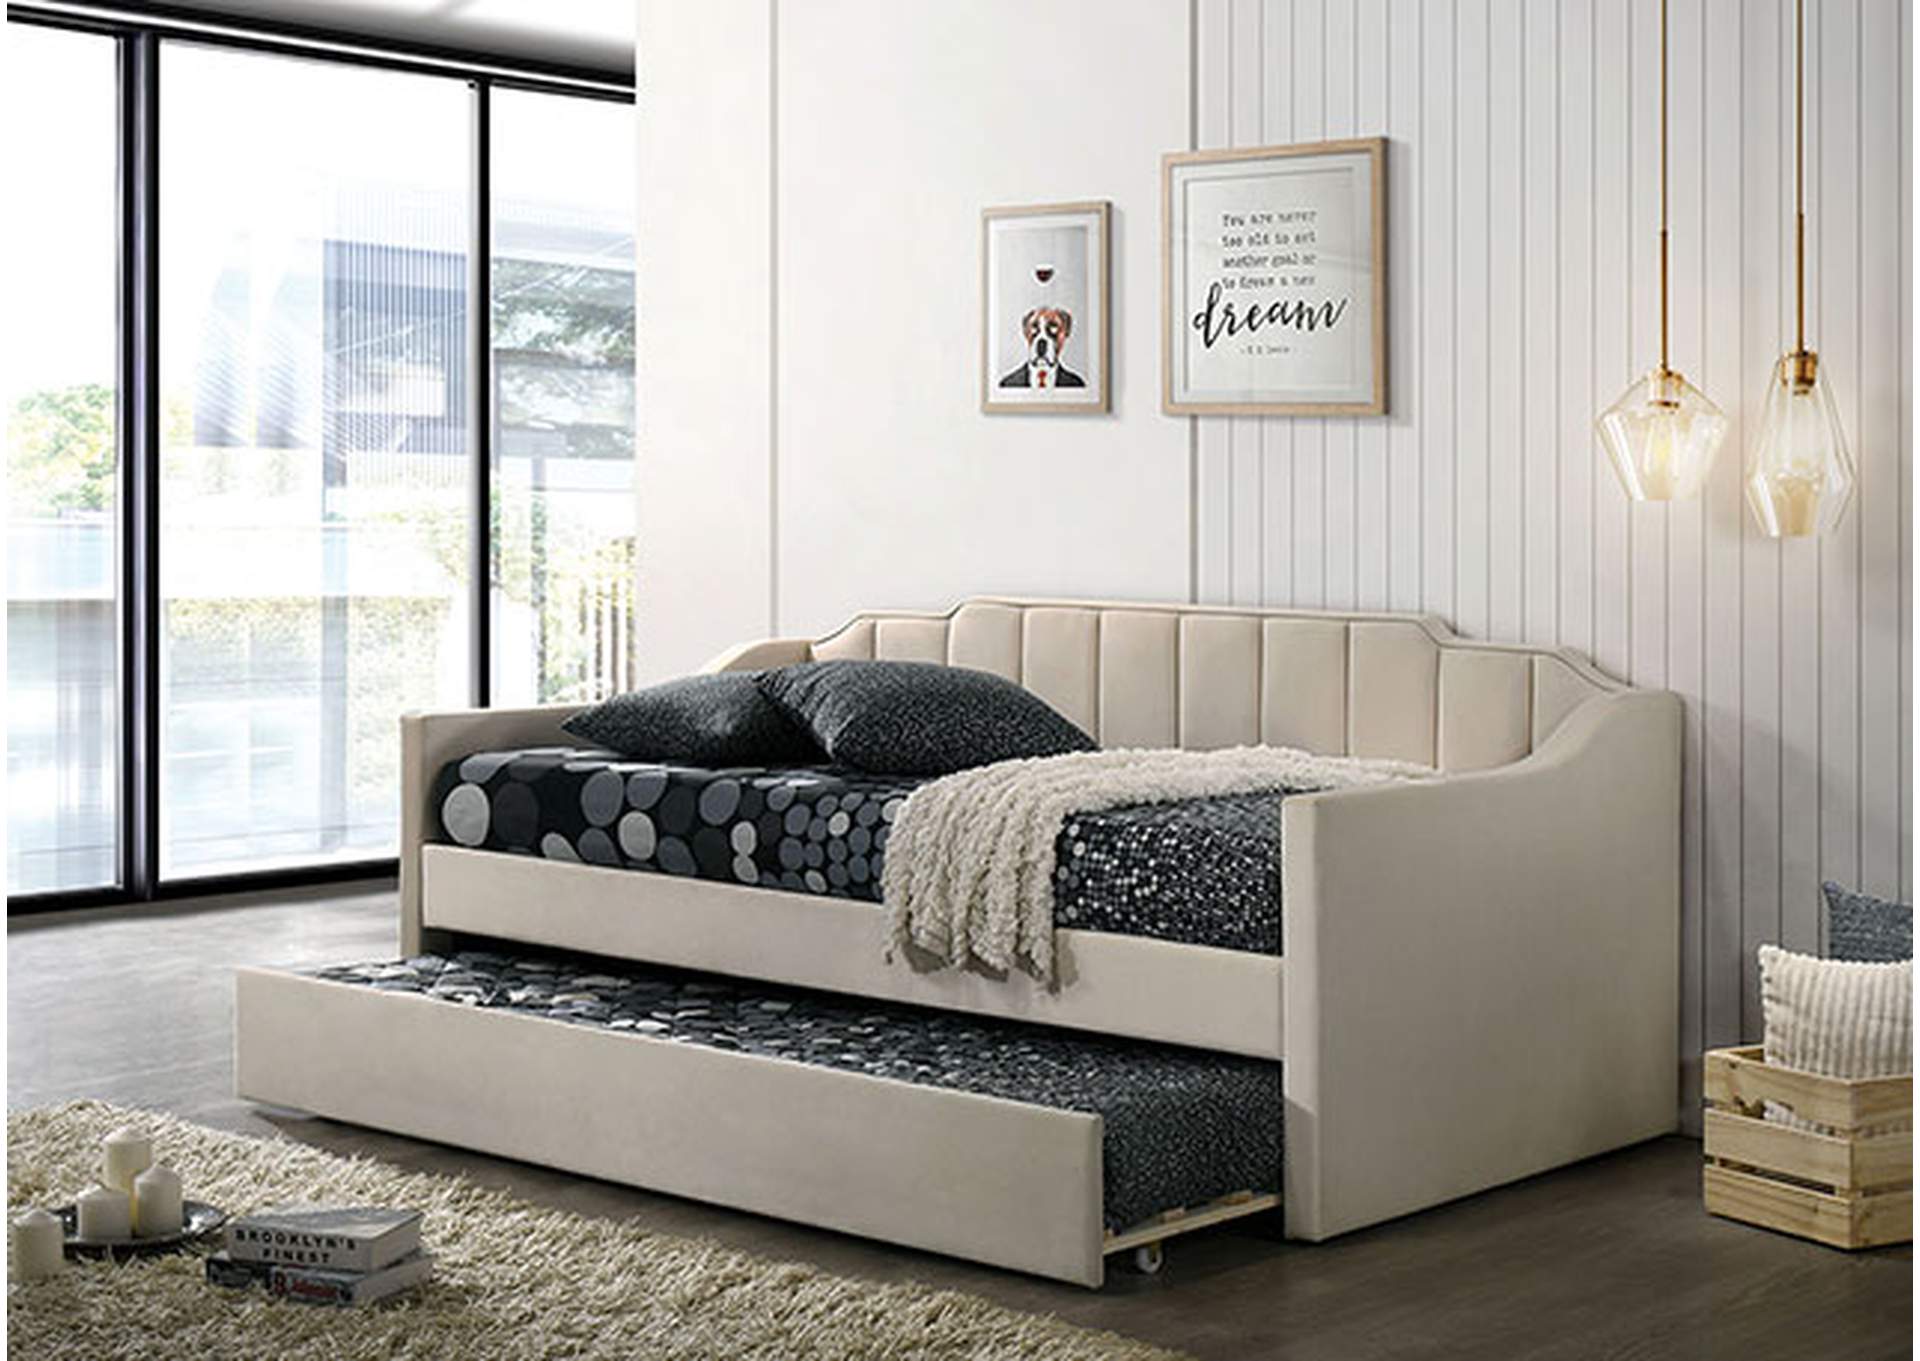 Kosmo Daybed,Furniture of America